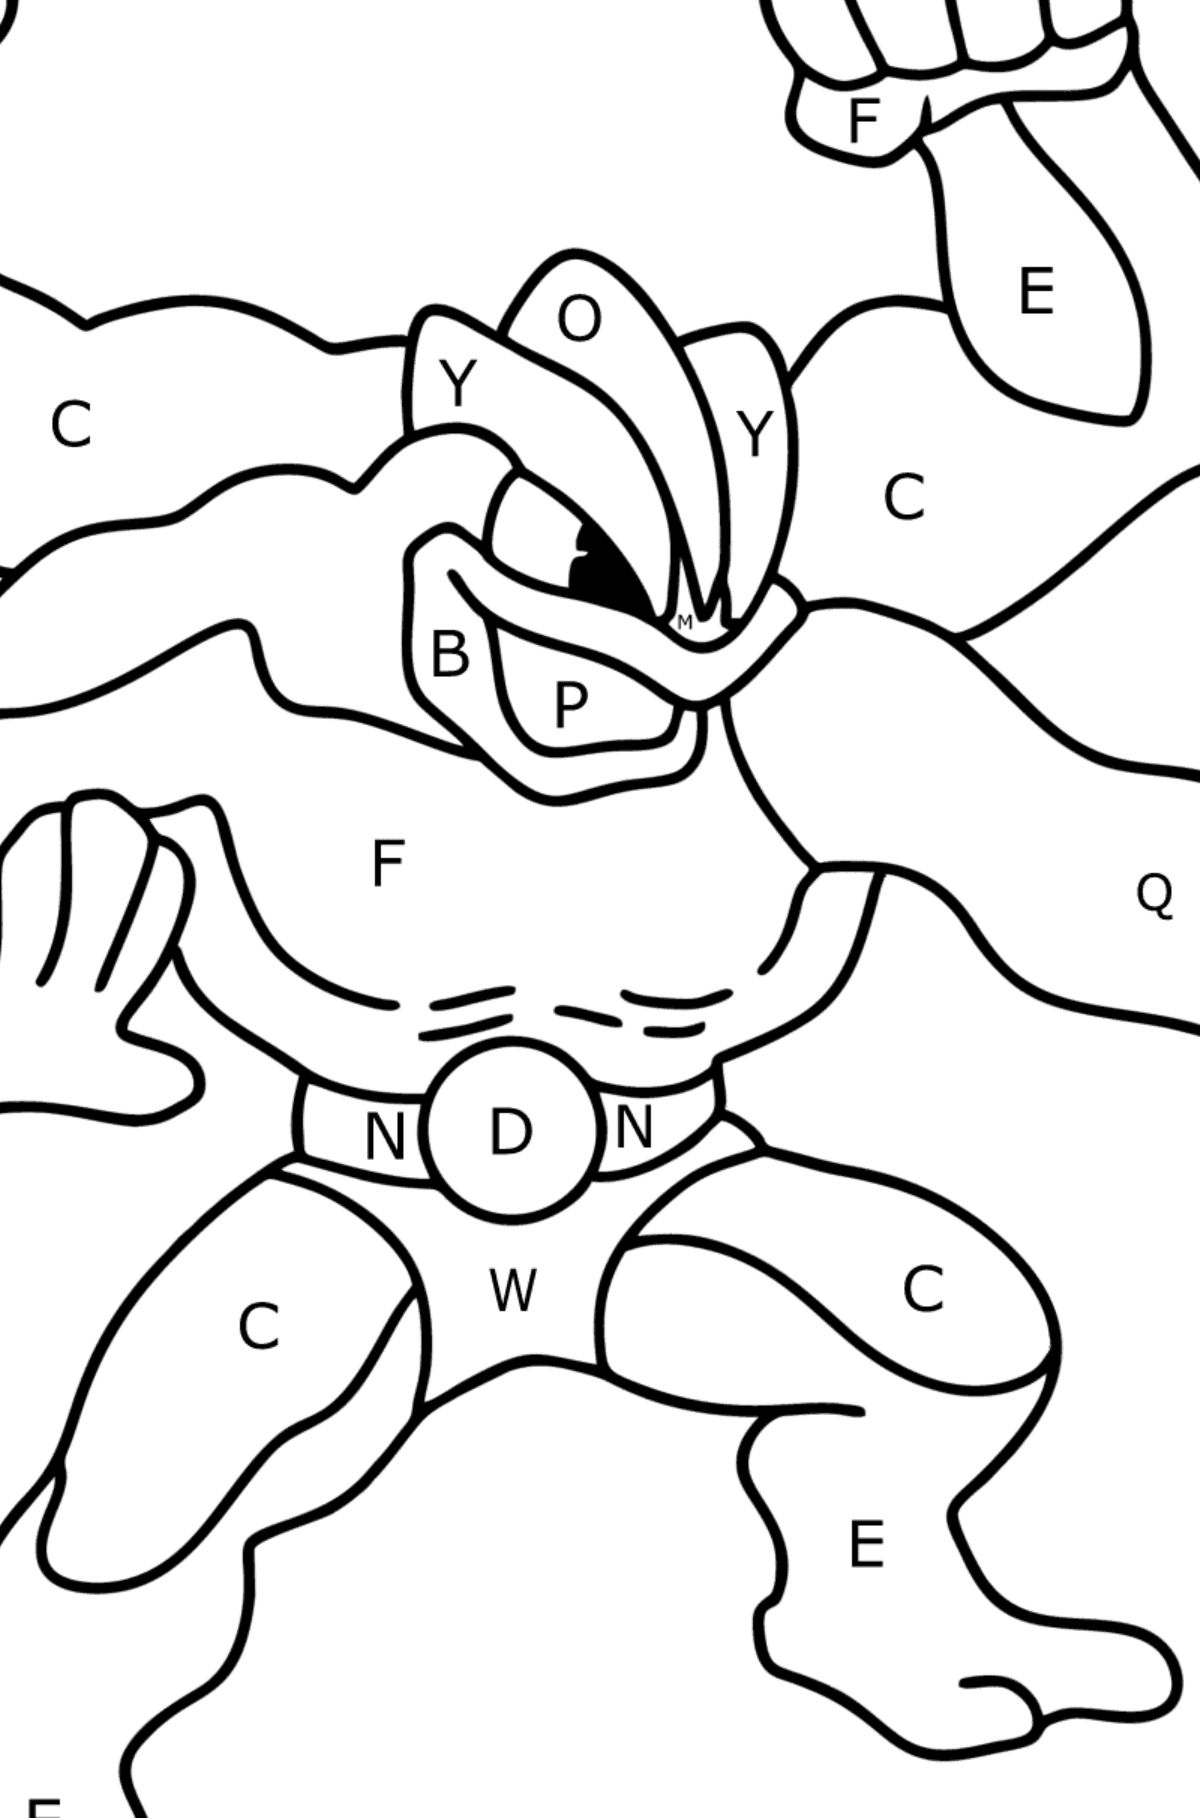 Coloring page Pokemon Go Machamp - Coloring by Letters for Kids